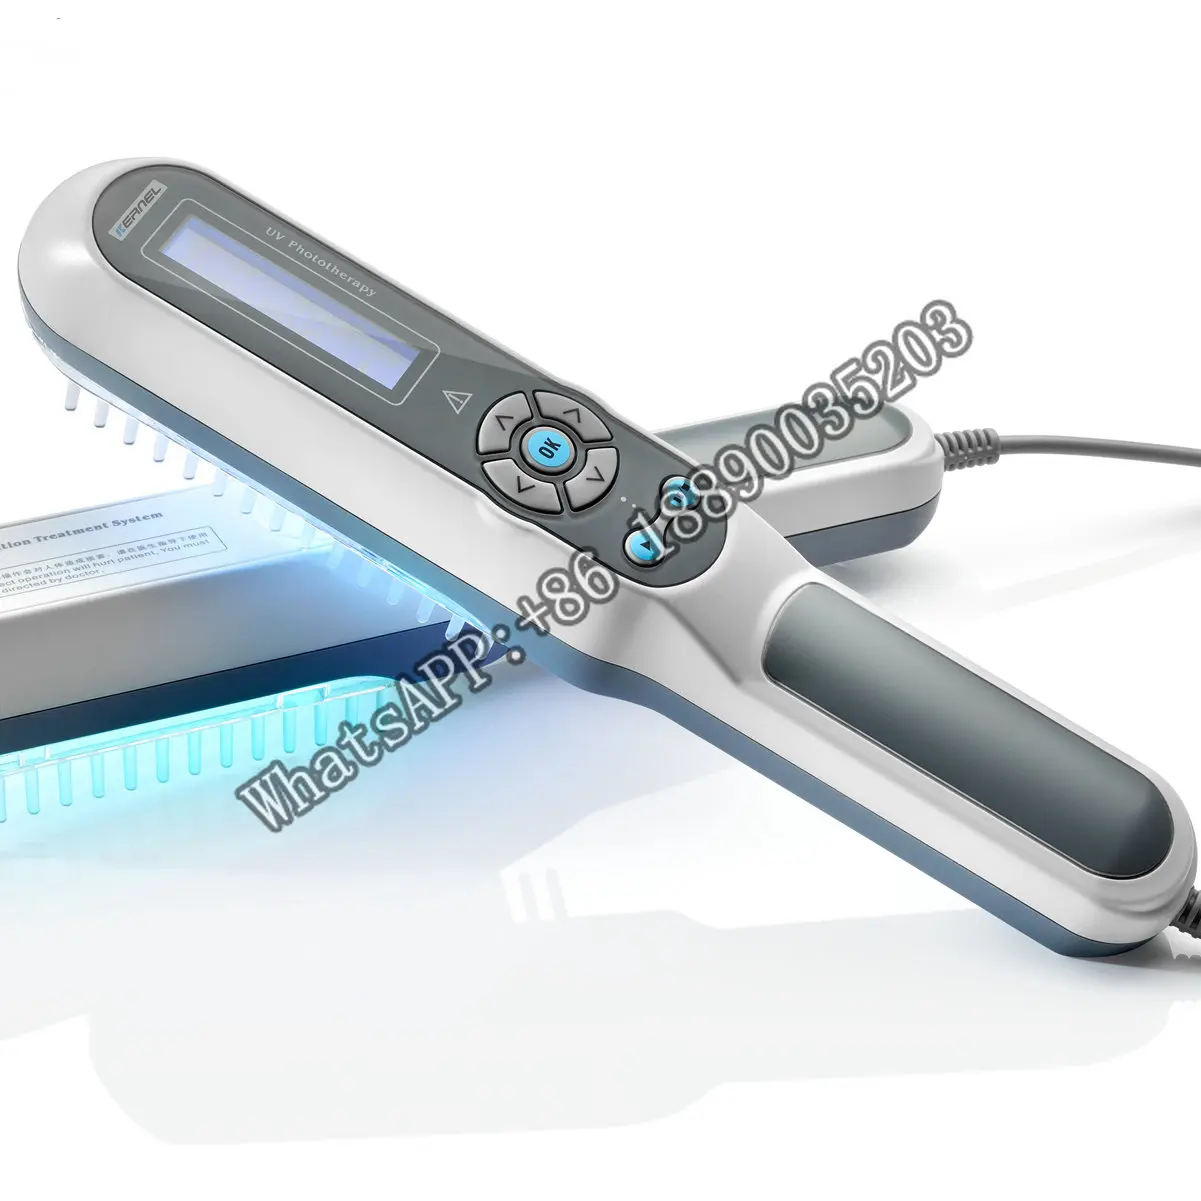 

Kernel kn-4003 311 nm UVB Phototherapy Medical home use vitiligo treatment psoriasis skin treatment laser devices instrument